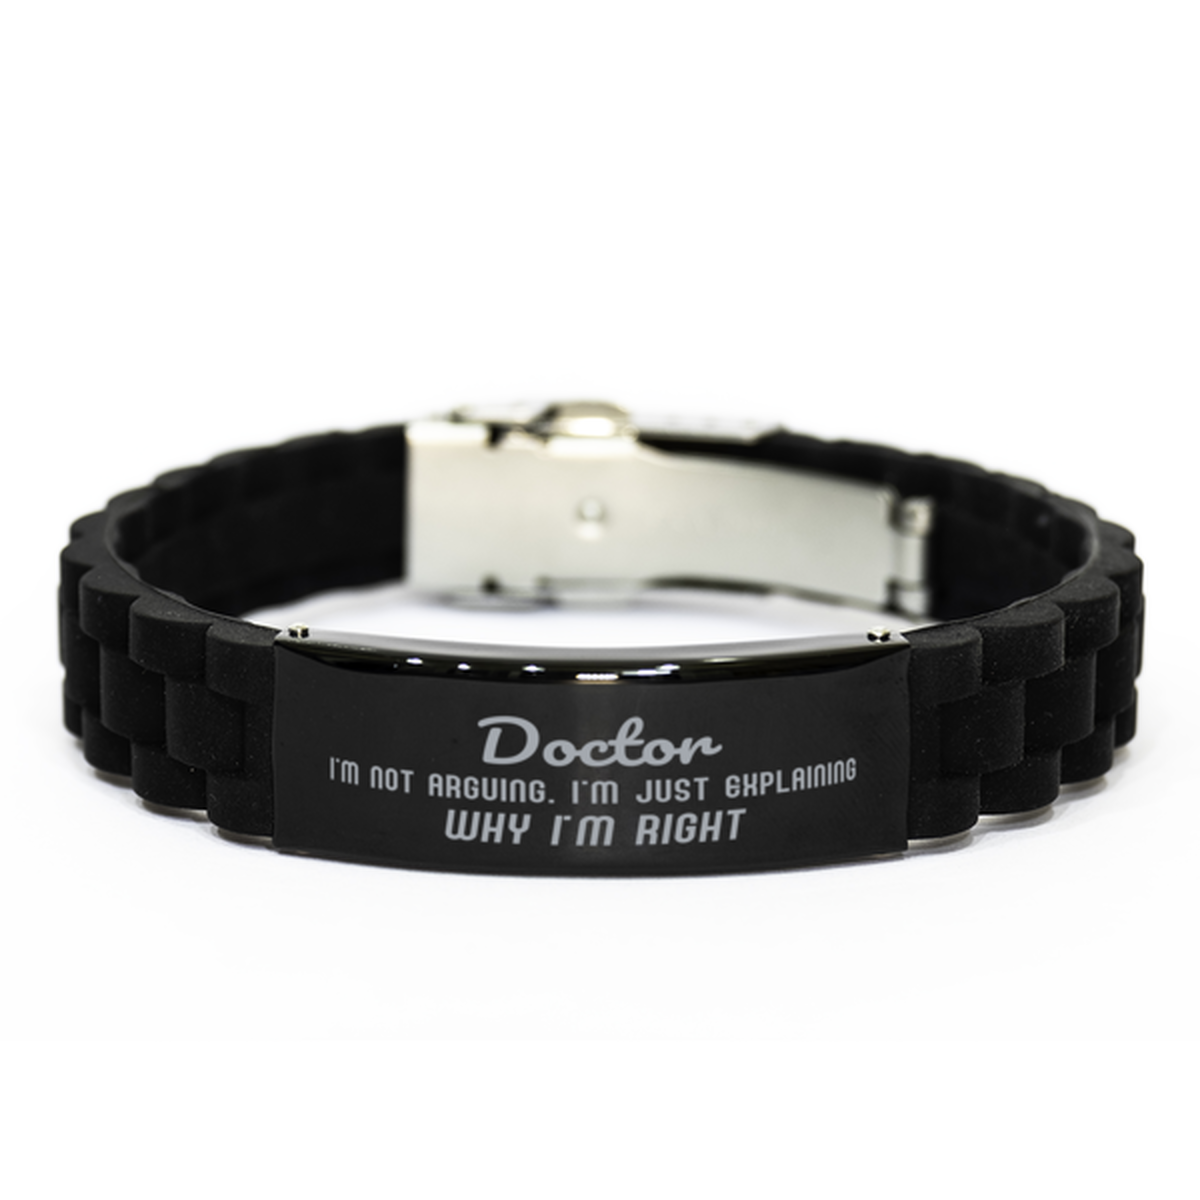 Doctor I'm not Arguing. I'm Just Explaining Why I'm RIGHT Black Glidelock Clasp Bracelet, Funny Saying Quote Doctor Gifts For Doctor Graduation Birthday Christmas Gifts for Men Women Coworker